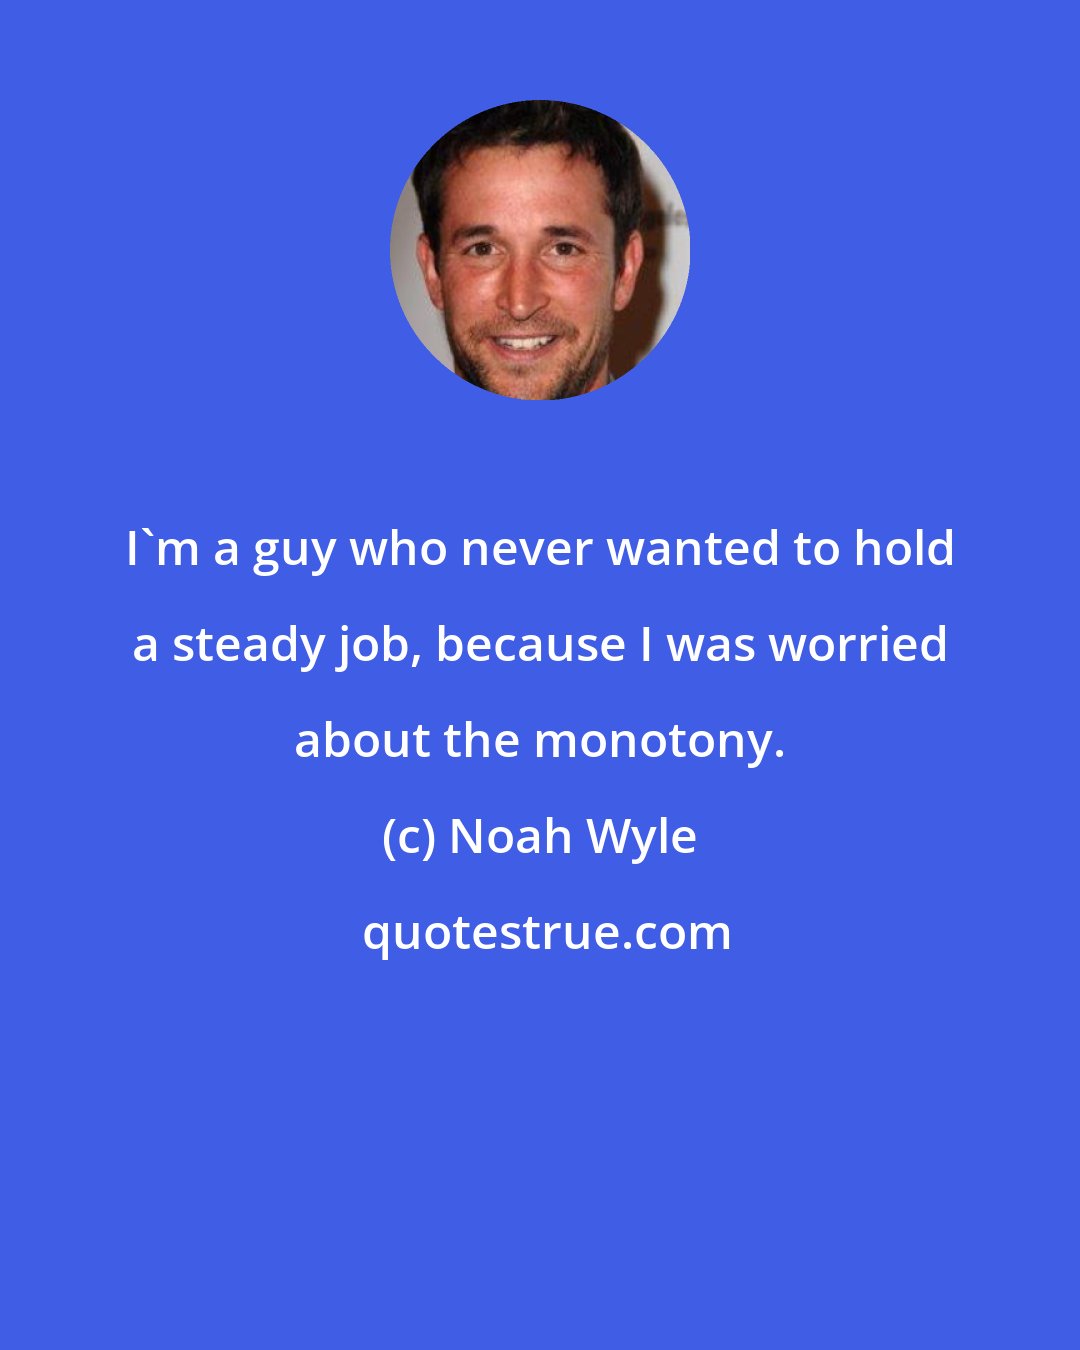 Noah Wyle: I'm a guy who never wanted to hold a steady job, because I was worried about the monotony.